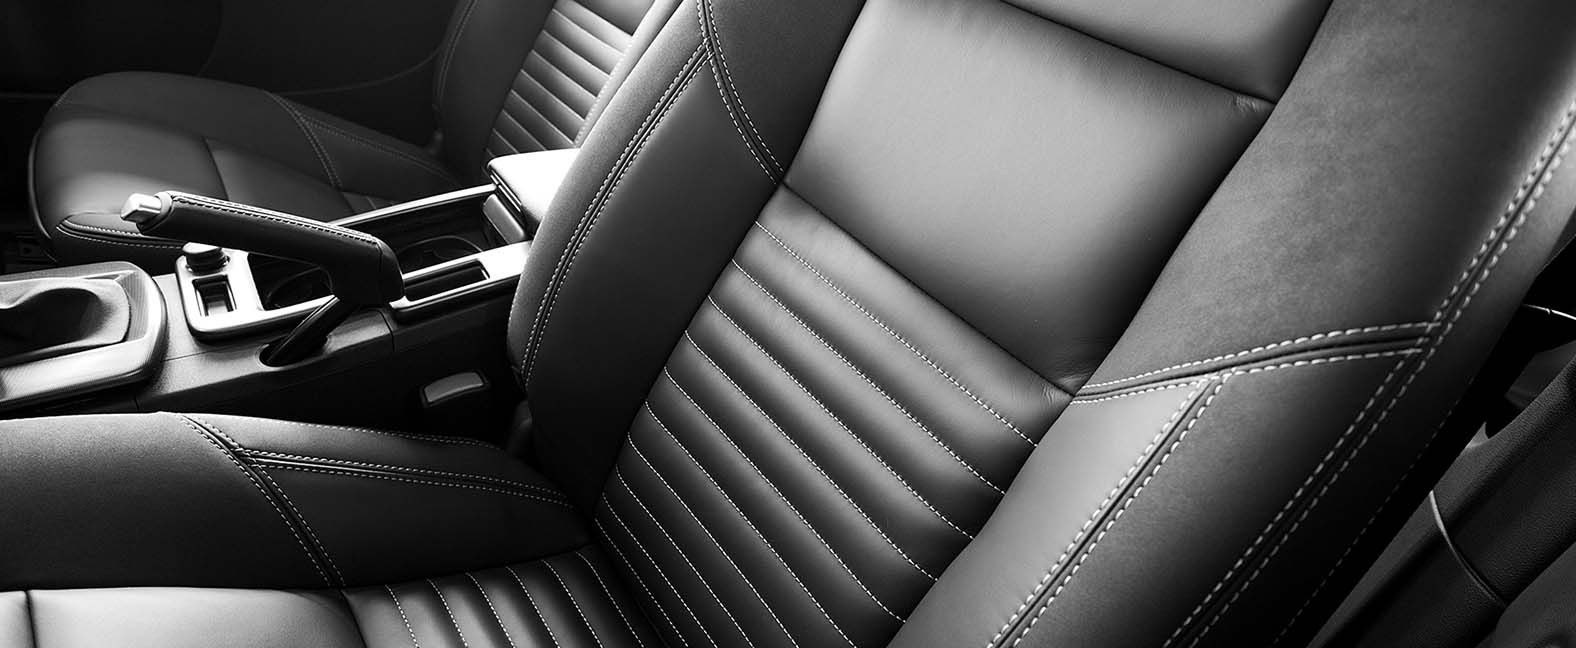 Leather interior of a luxury vehicle.